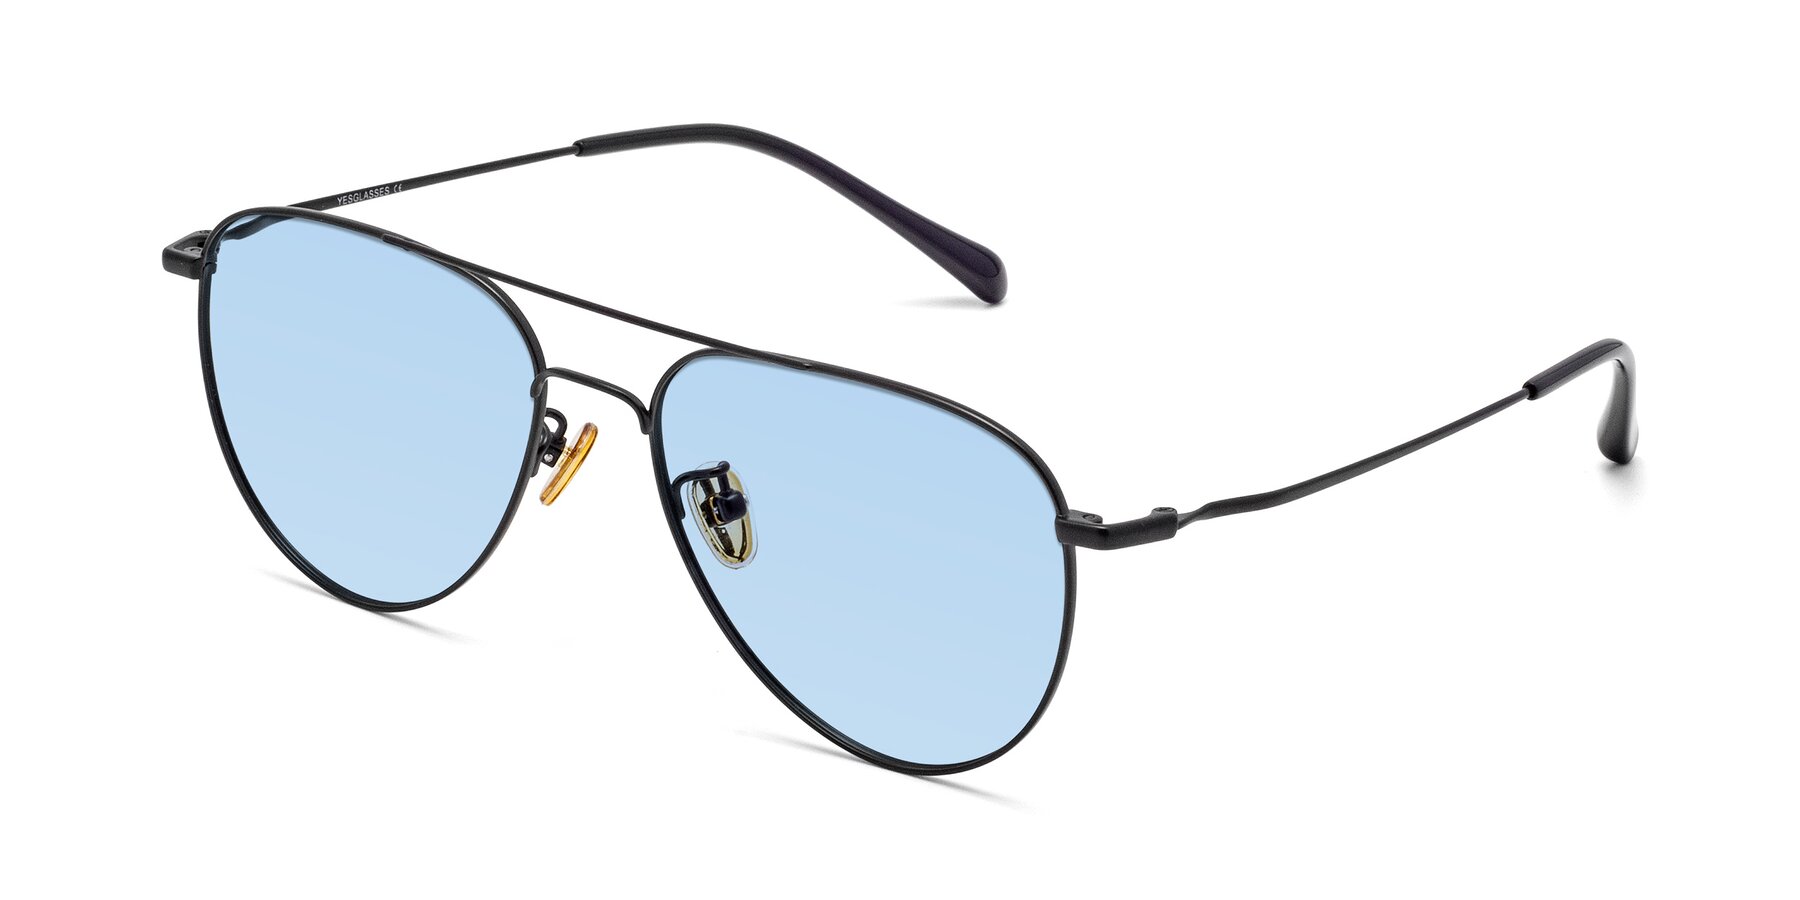 Angle of Hindley in Black with Light Blue Tinted Lenses